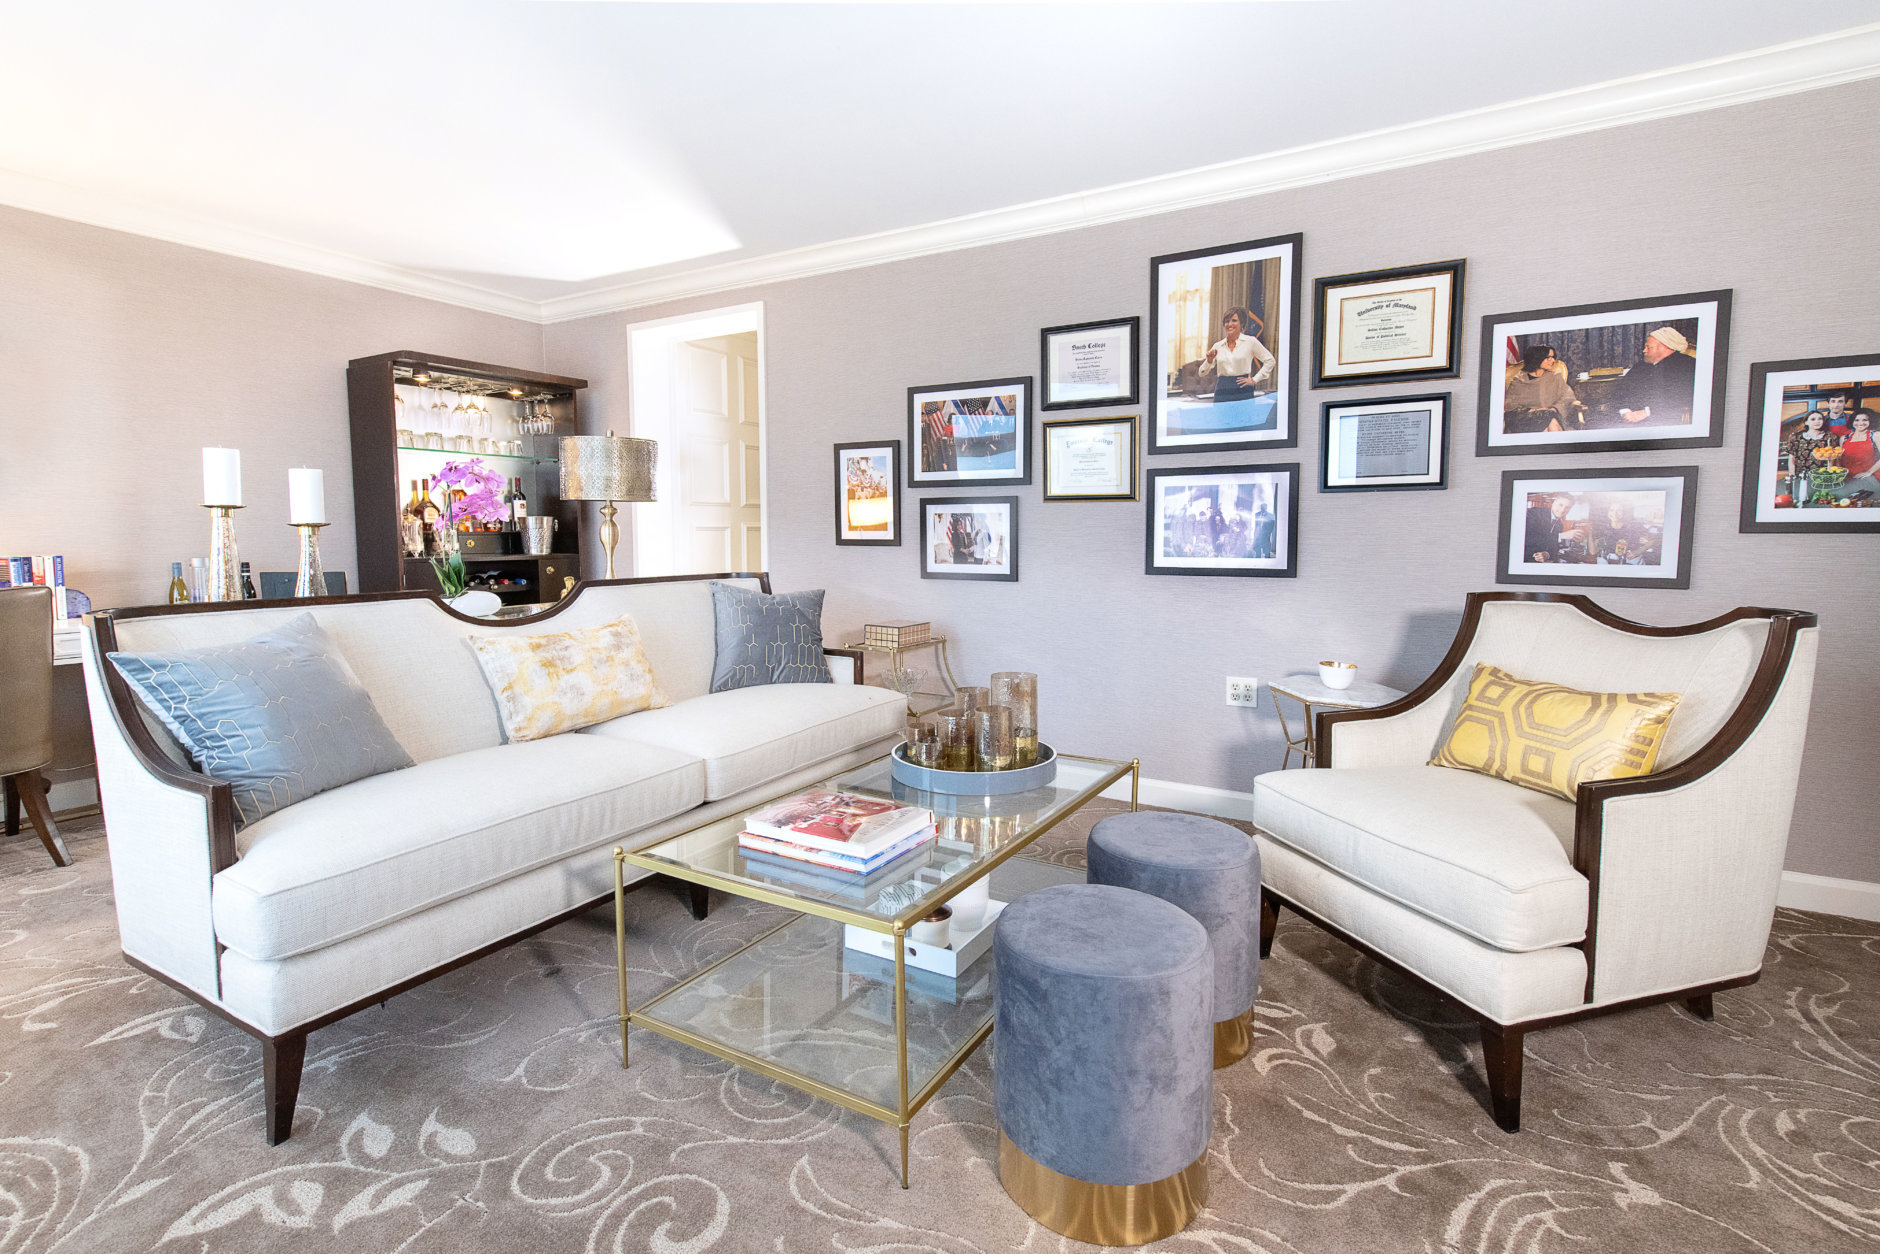 For uber-fans who want the ultimate "Veep" experience at the Hamilton, a one-bedroom suite on the 12th floor is now the Selina Meyer Presidential Suite, with set props and mementos from the fictional president’s brownstone home. (Courtesy Hamilton Hotel)